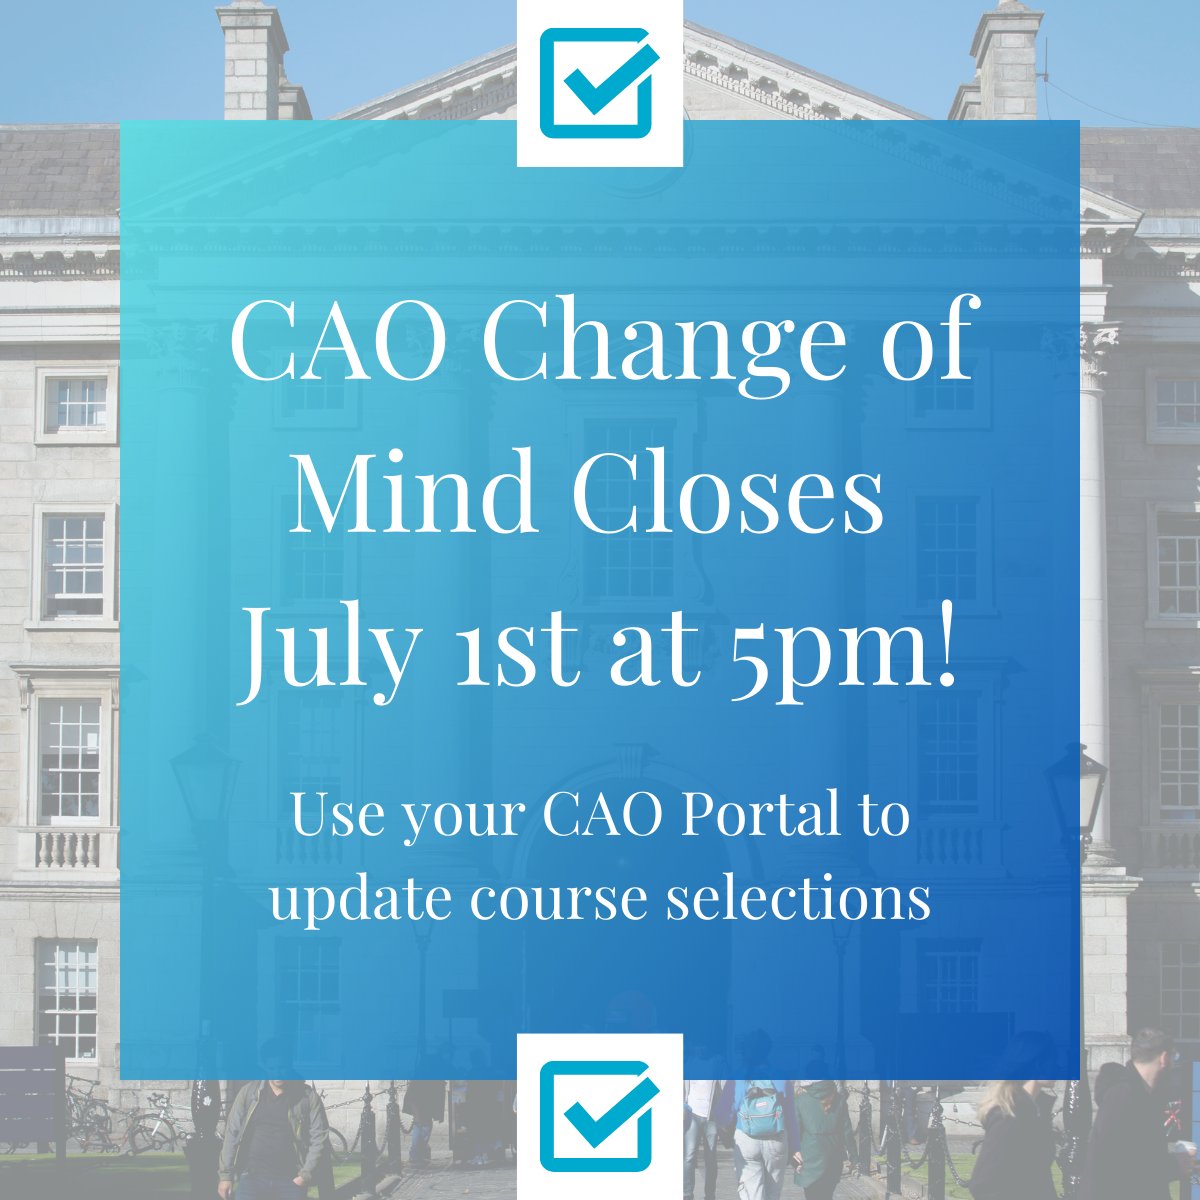 Final Reminder! 

CAO Change of Mind closes TOMORROW! Be sure to update your course selections on your CAO Portal 

#ThinkTrinity